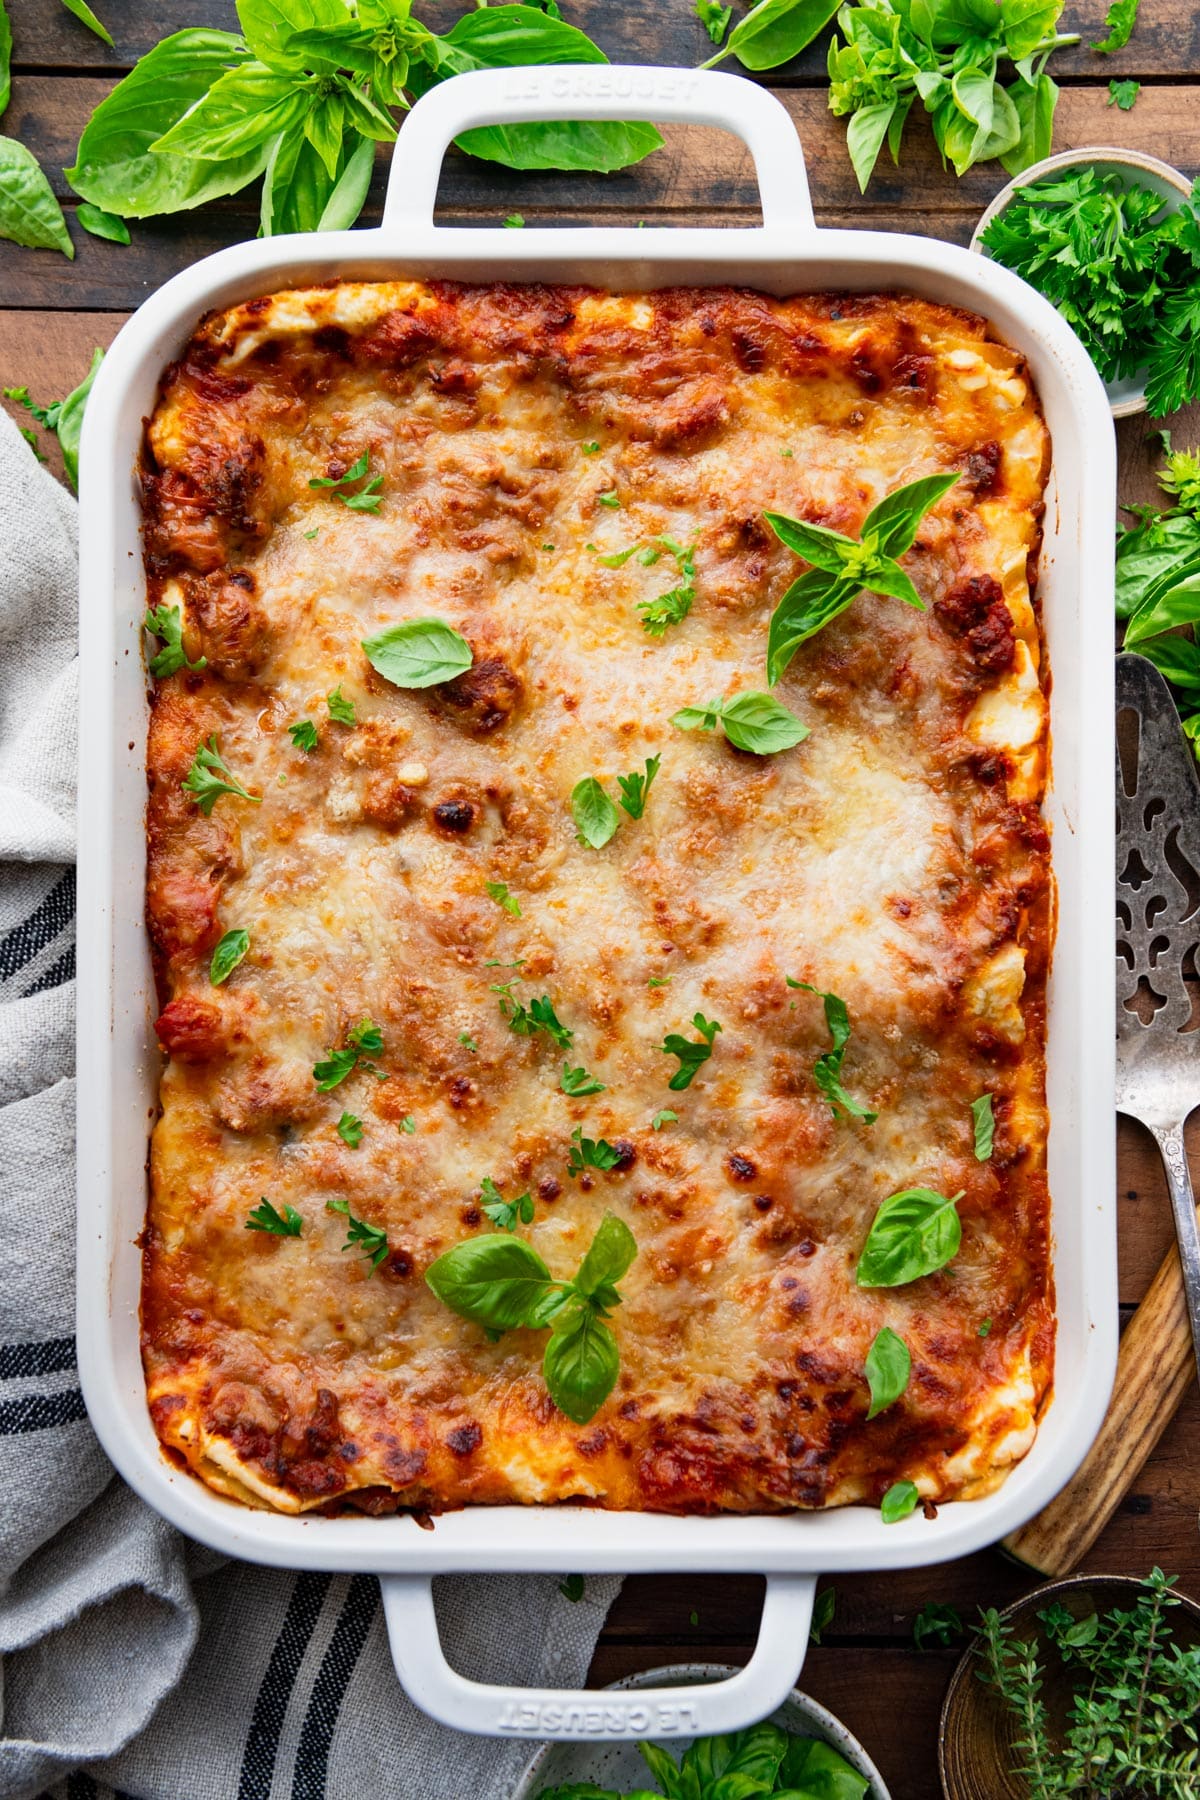 Pan of classic lasagna recipe in a white dish on a wooden table.